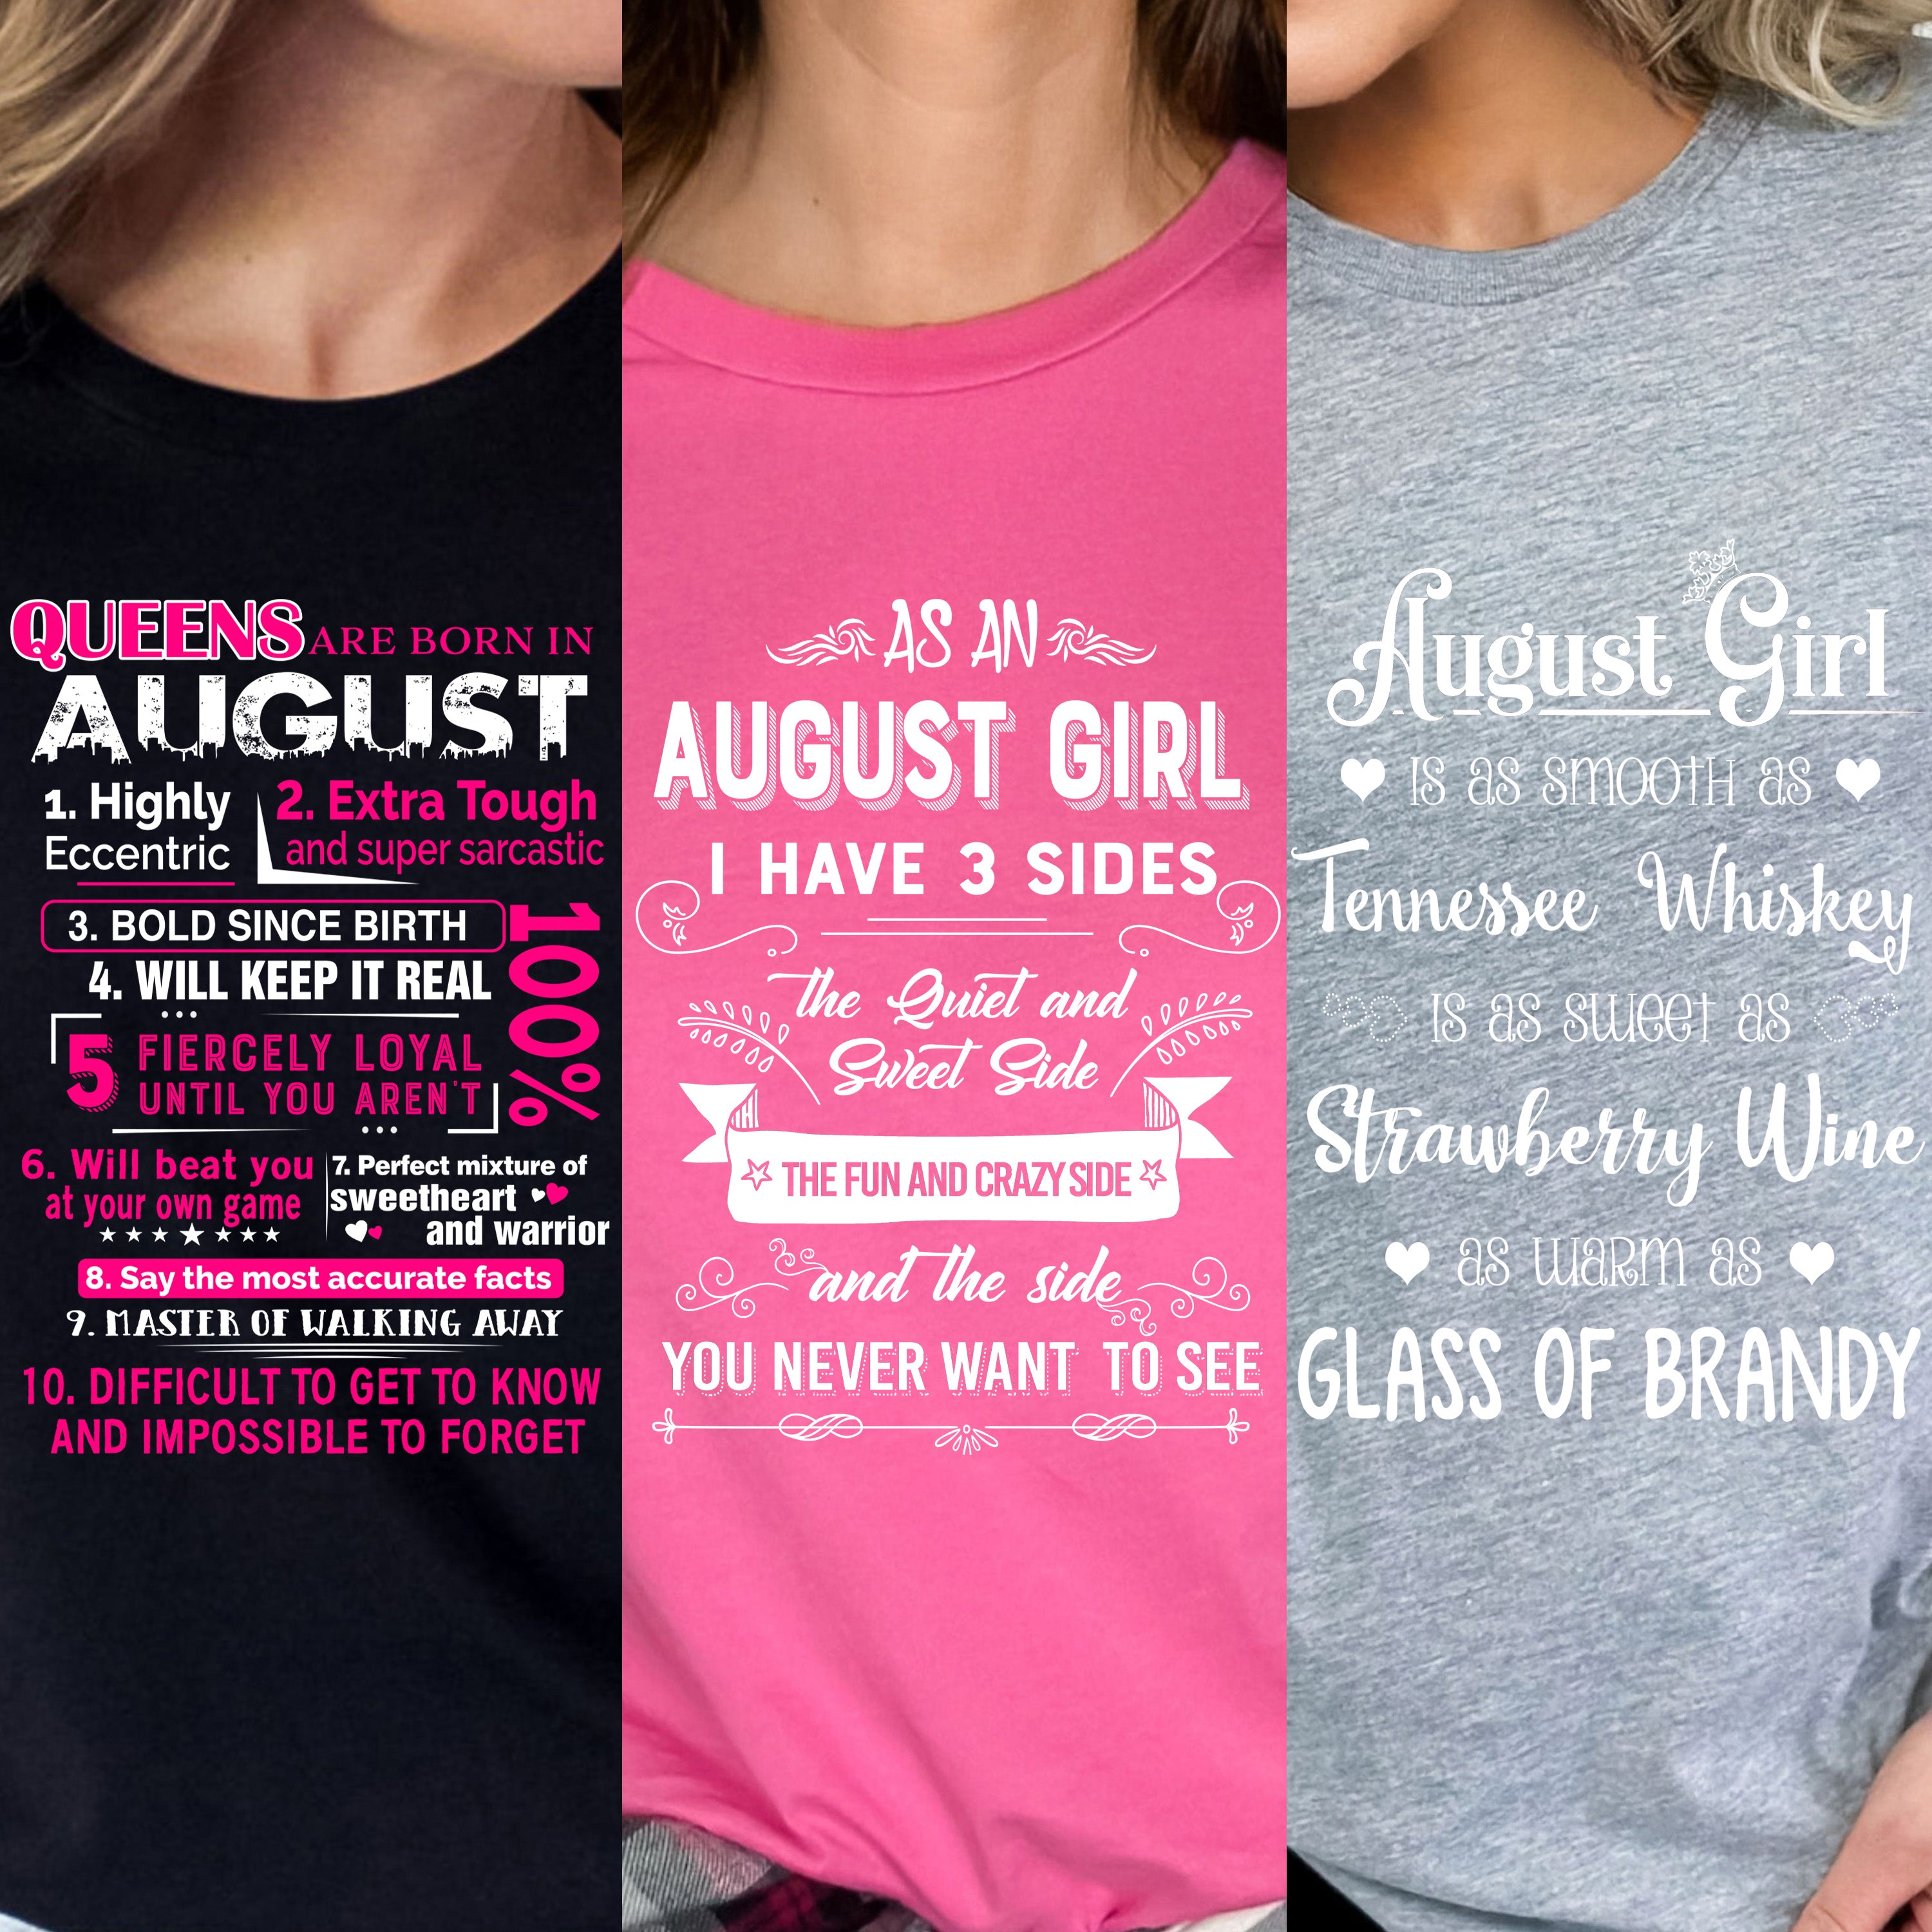 "August Pack Of 3 Popular Designs" Whiskey/3 Sides/Queens